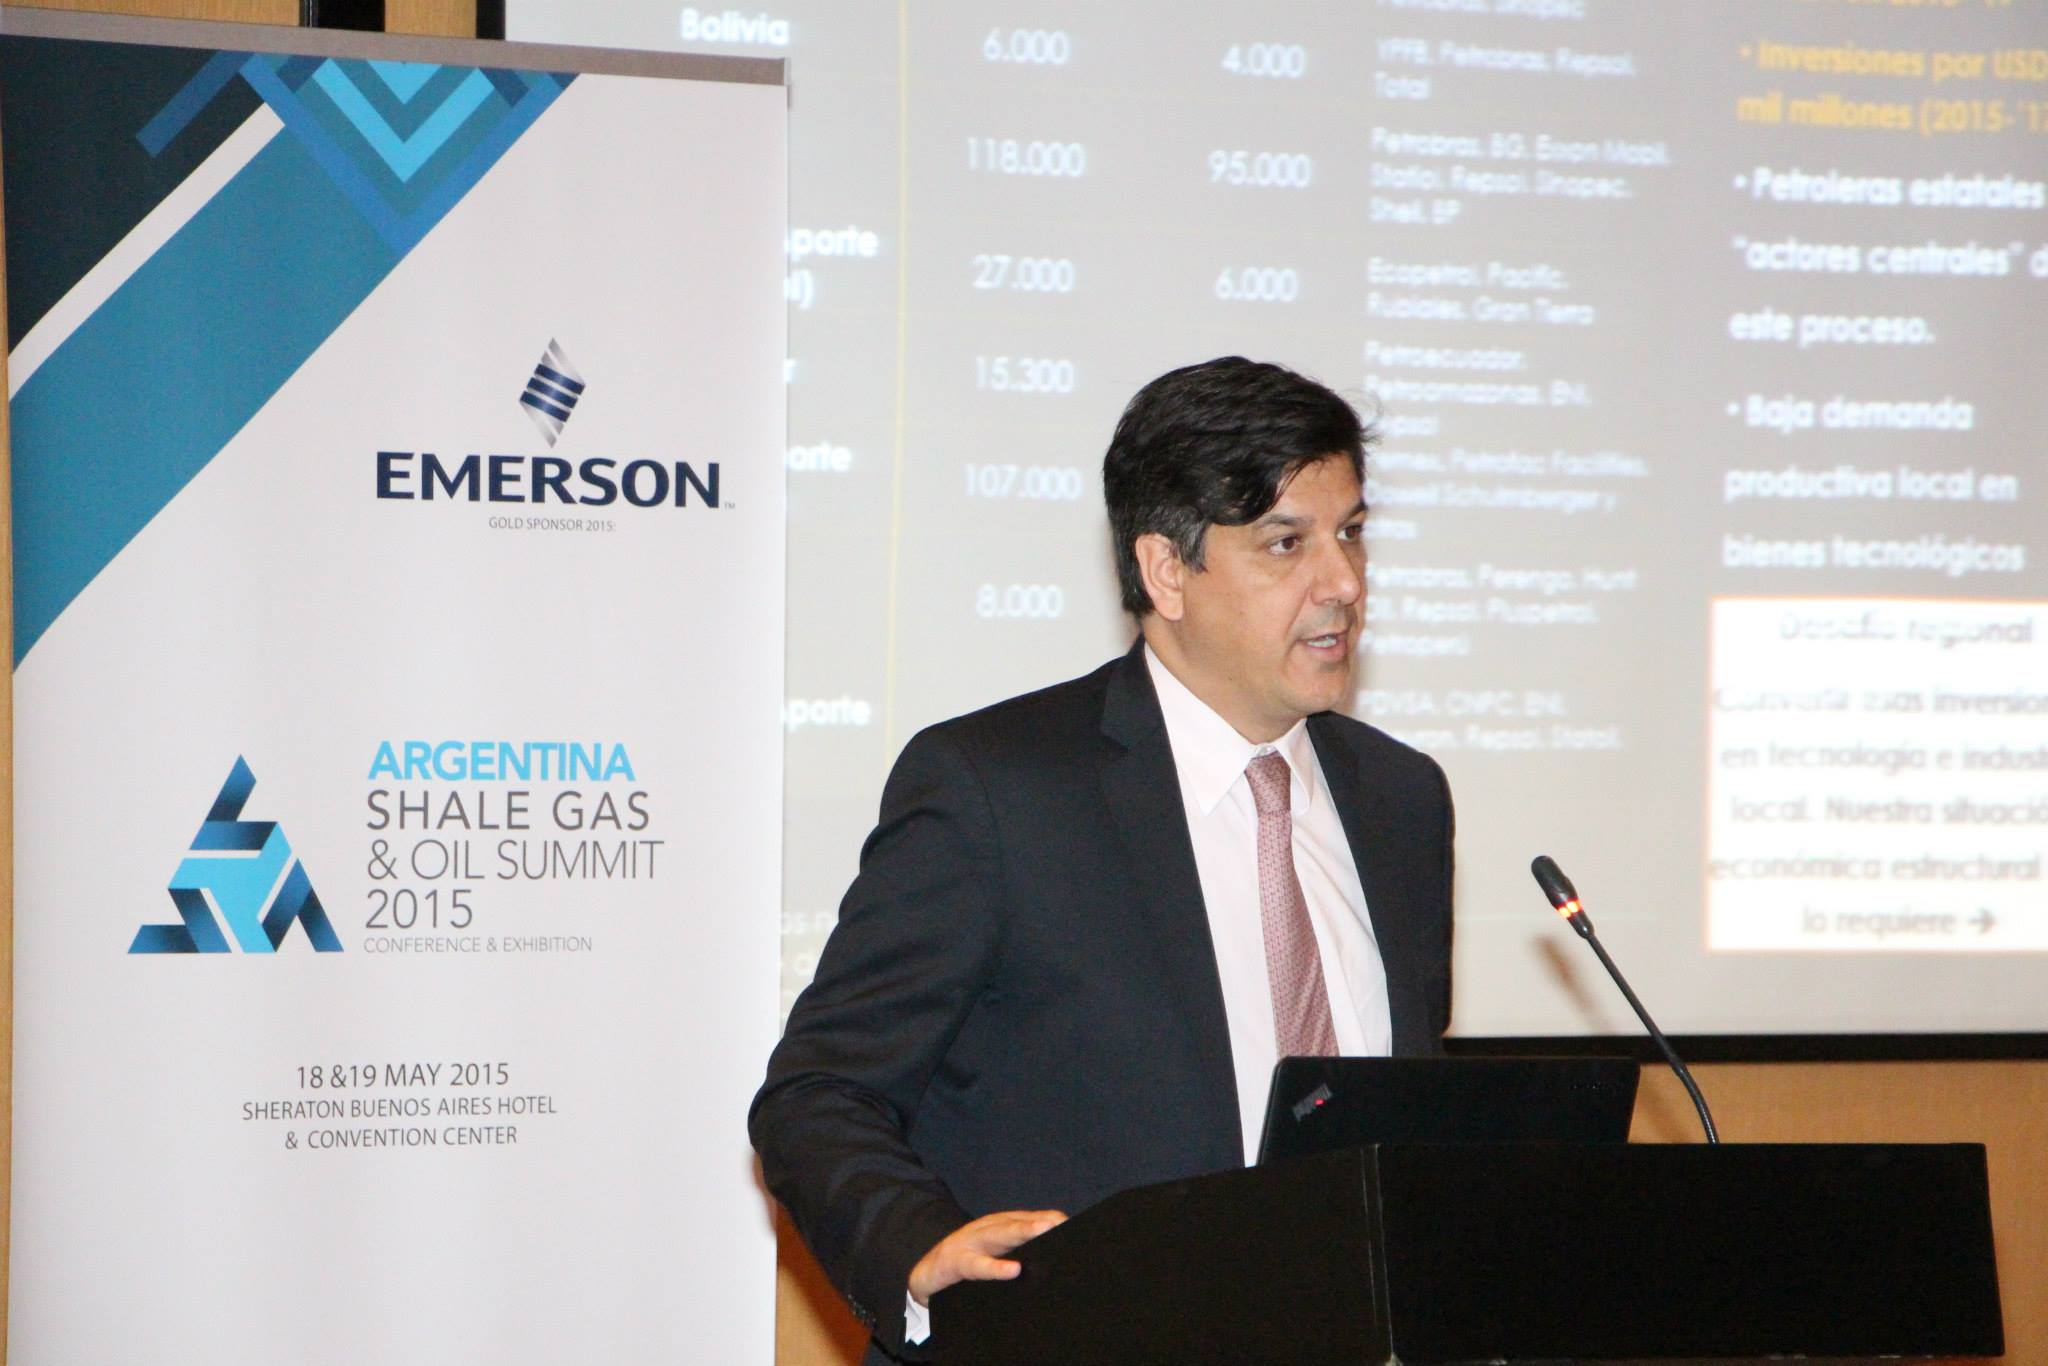 Argentine shale industry leaders to meet in Buenos Aires for high-level summit